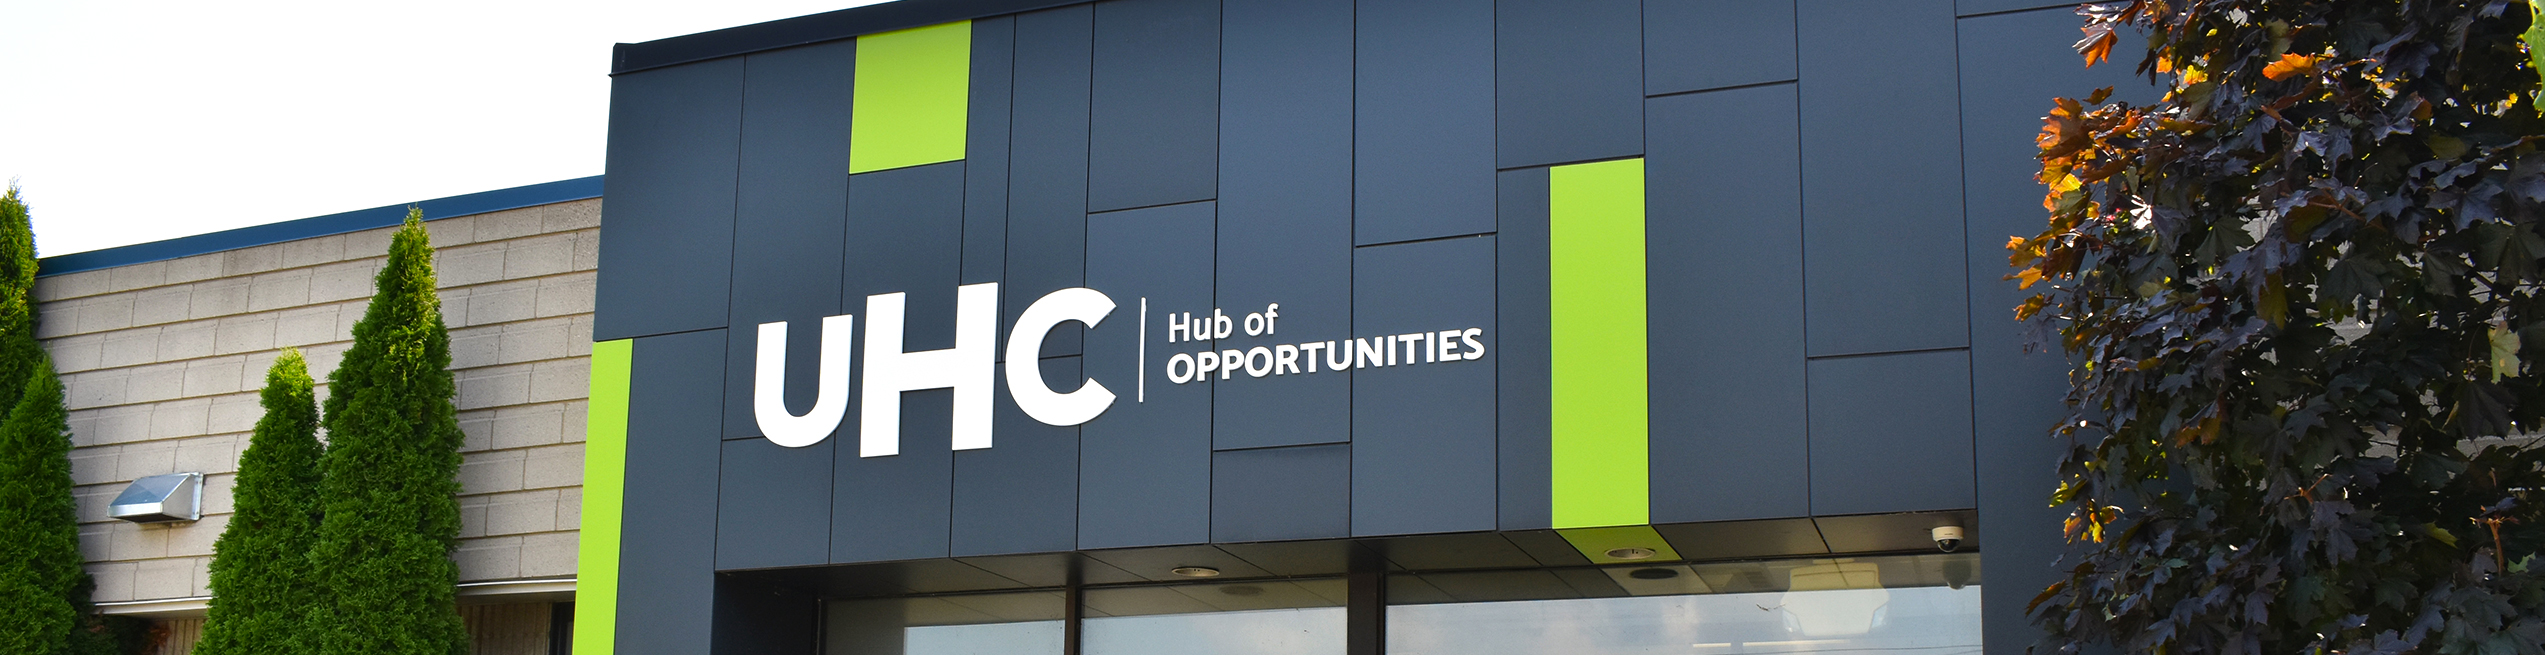 UHC-Hub of Opportunities